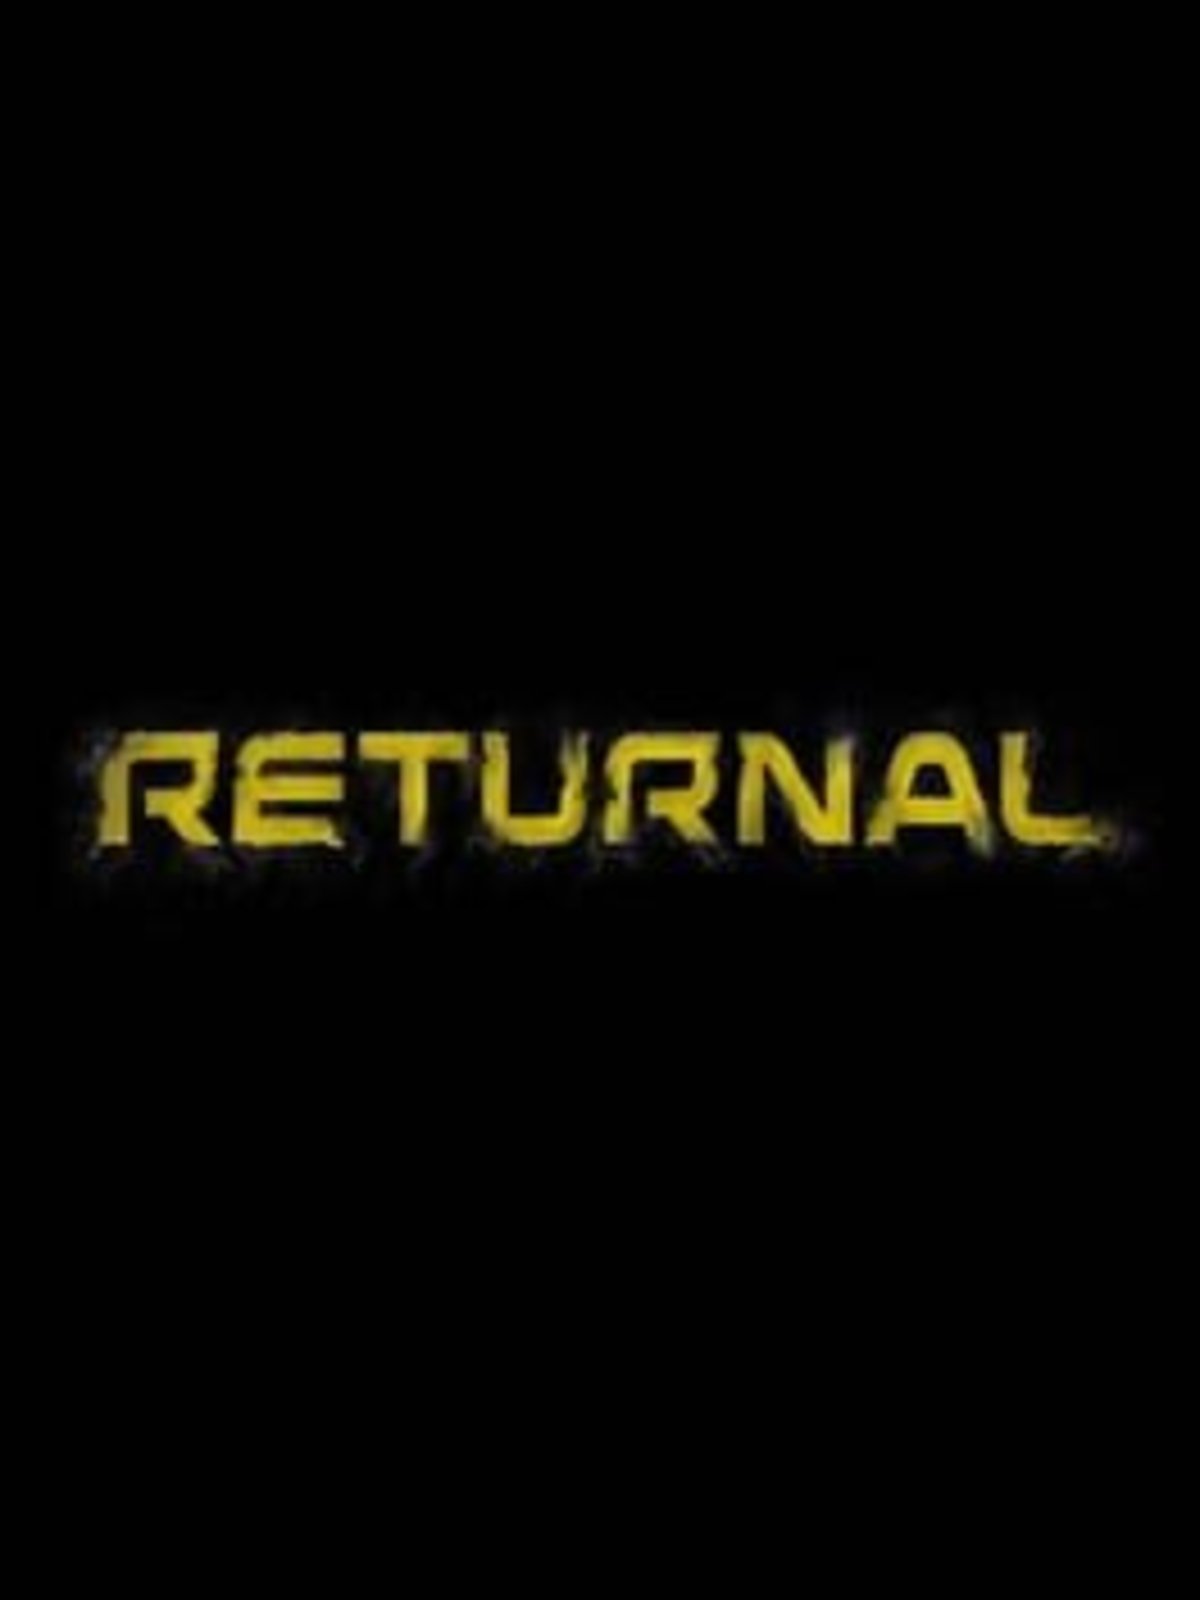 Reveal the percentage of players who have defeated the final boss of Returnal